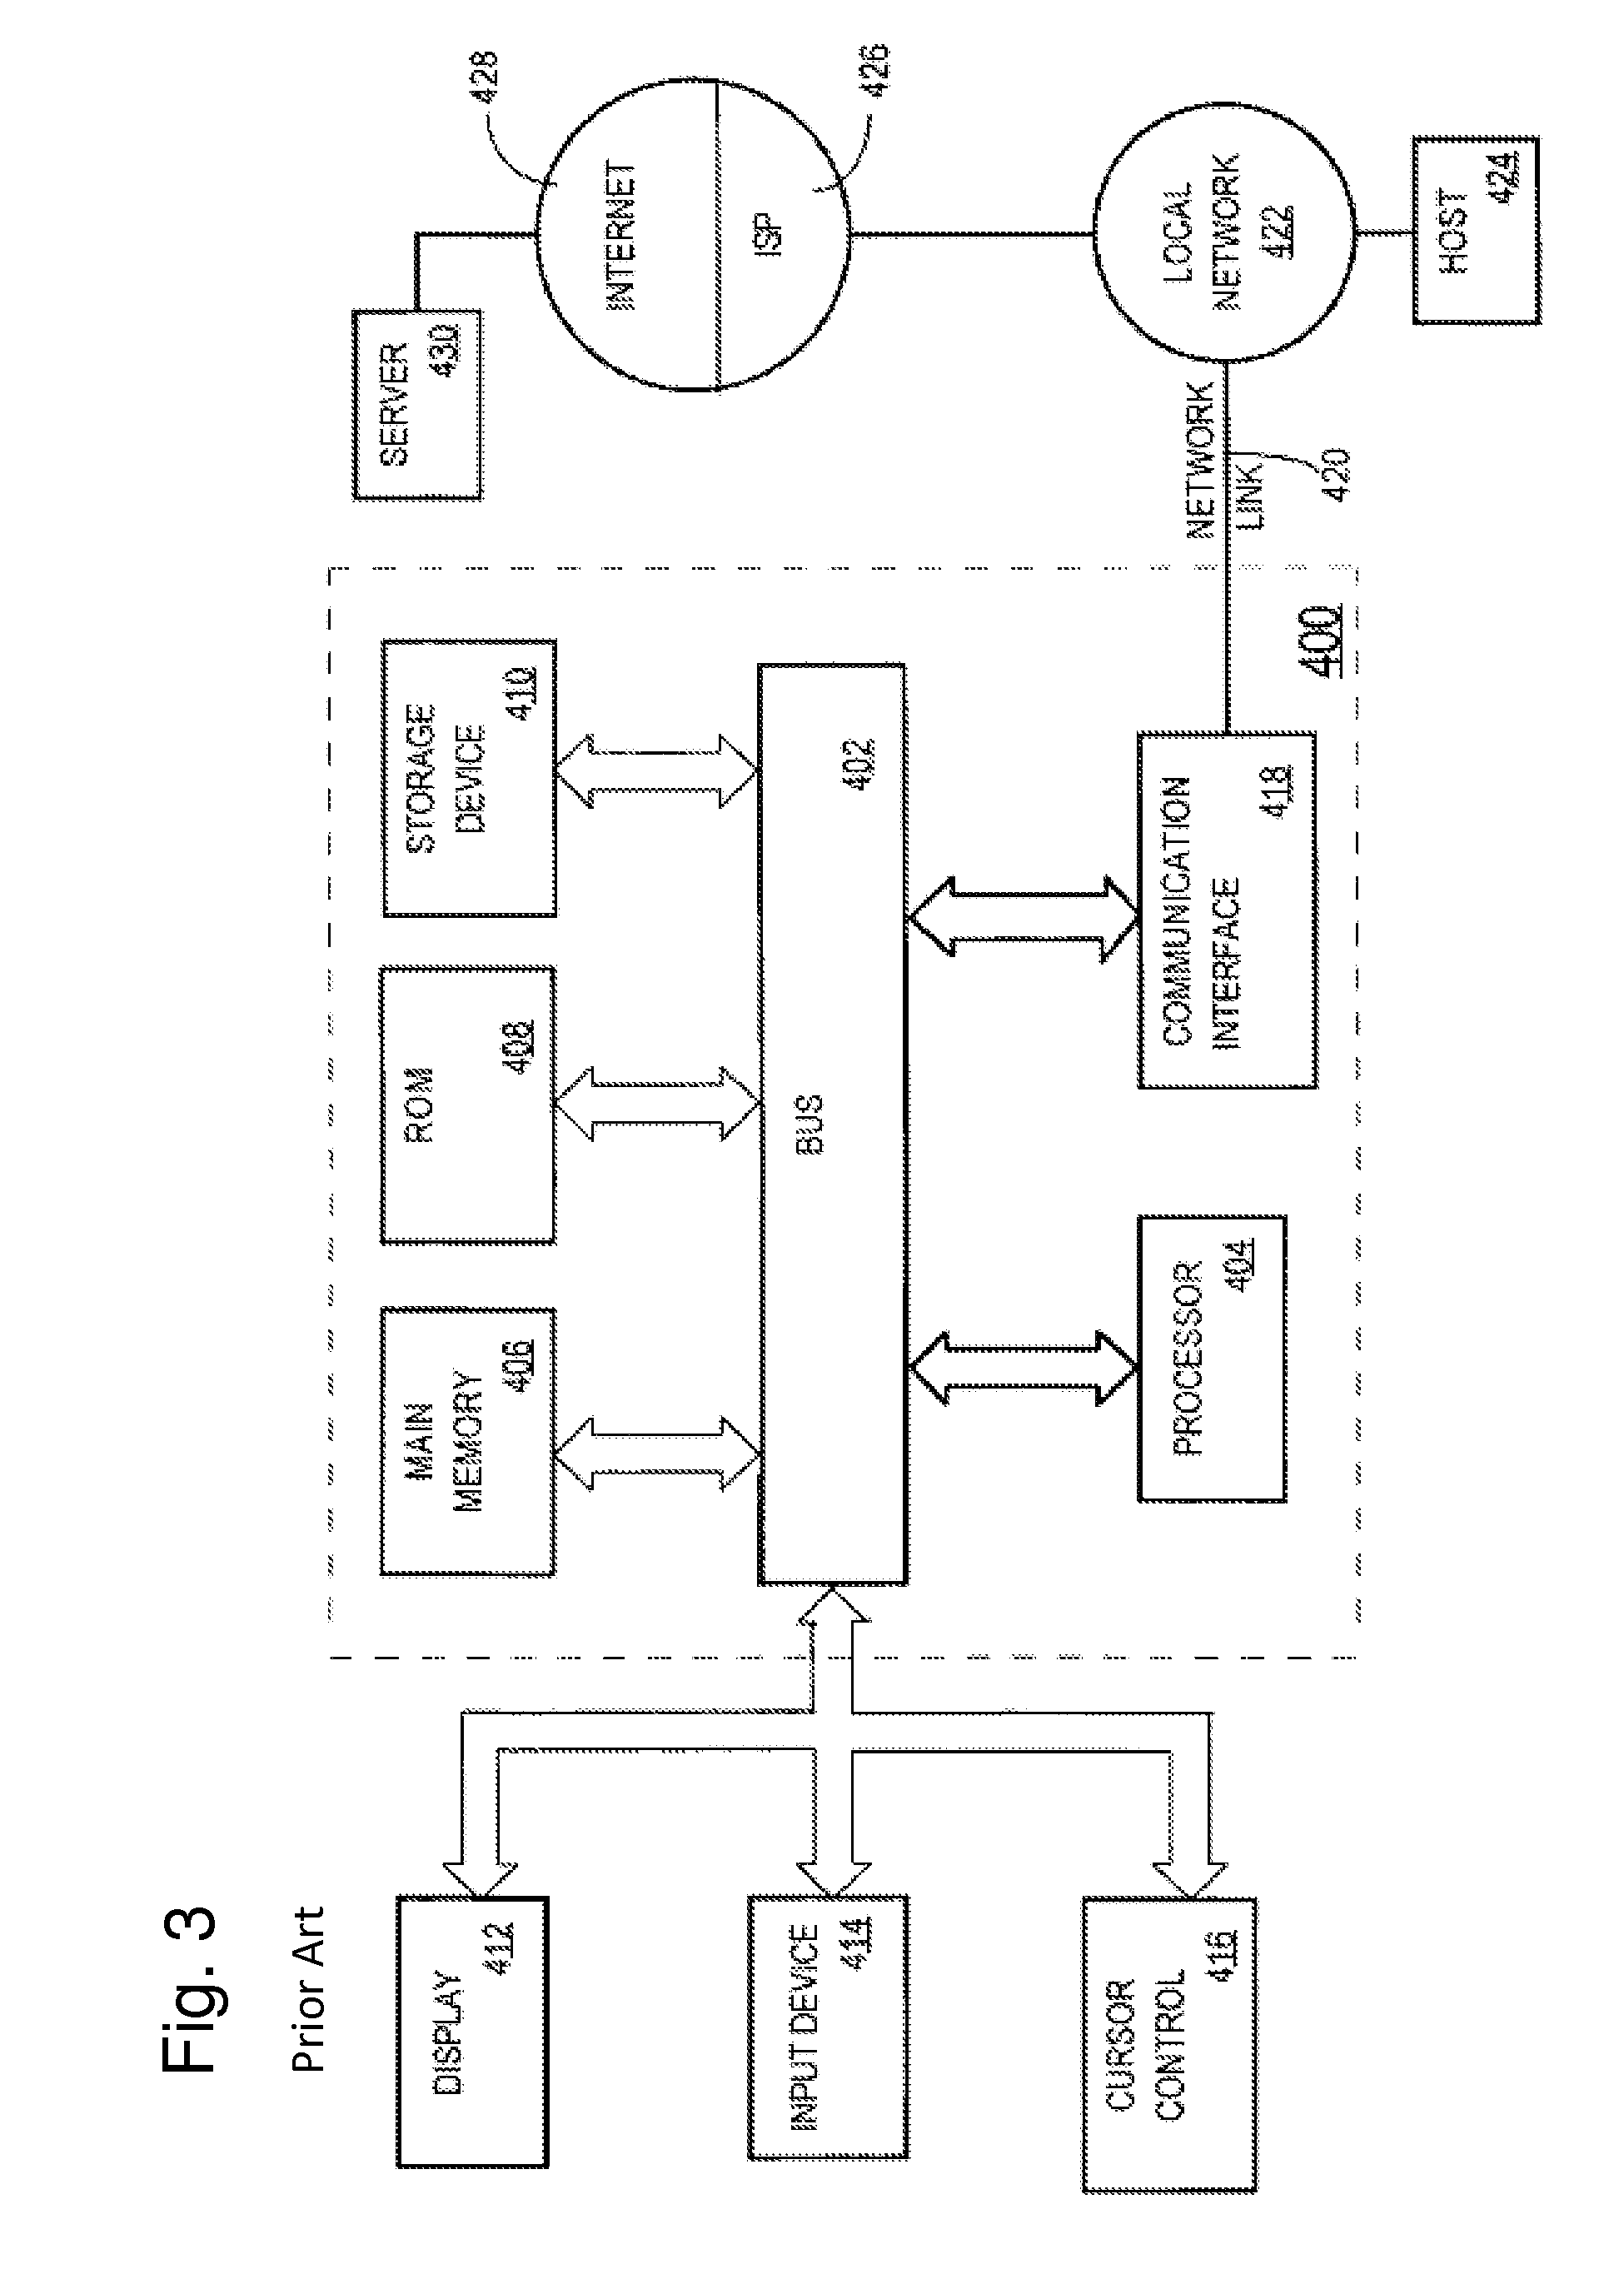 Energy aware processing load distribution system and method